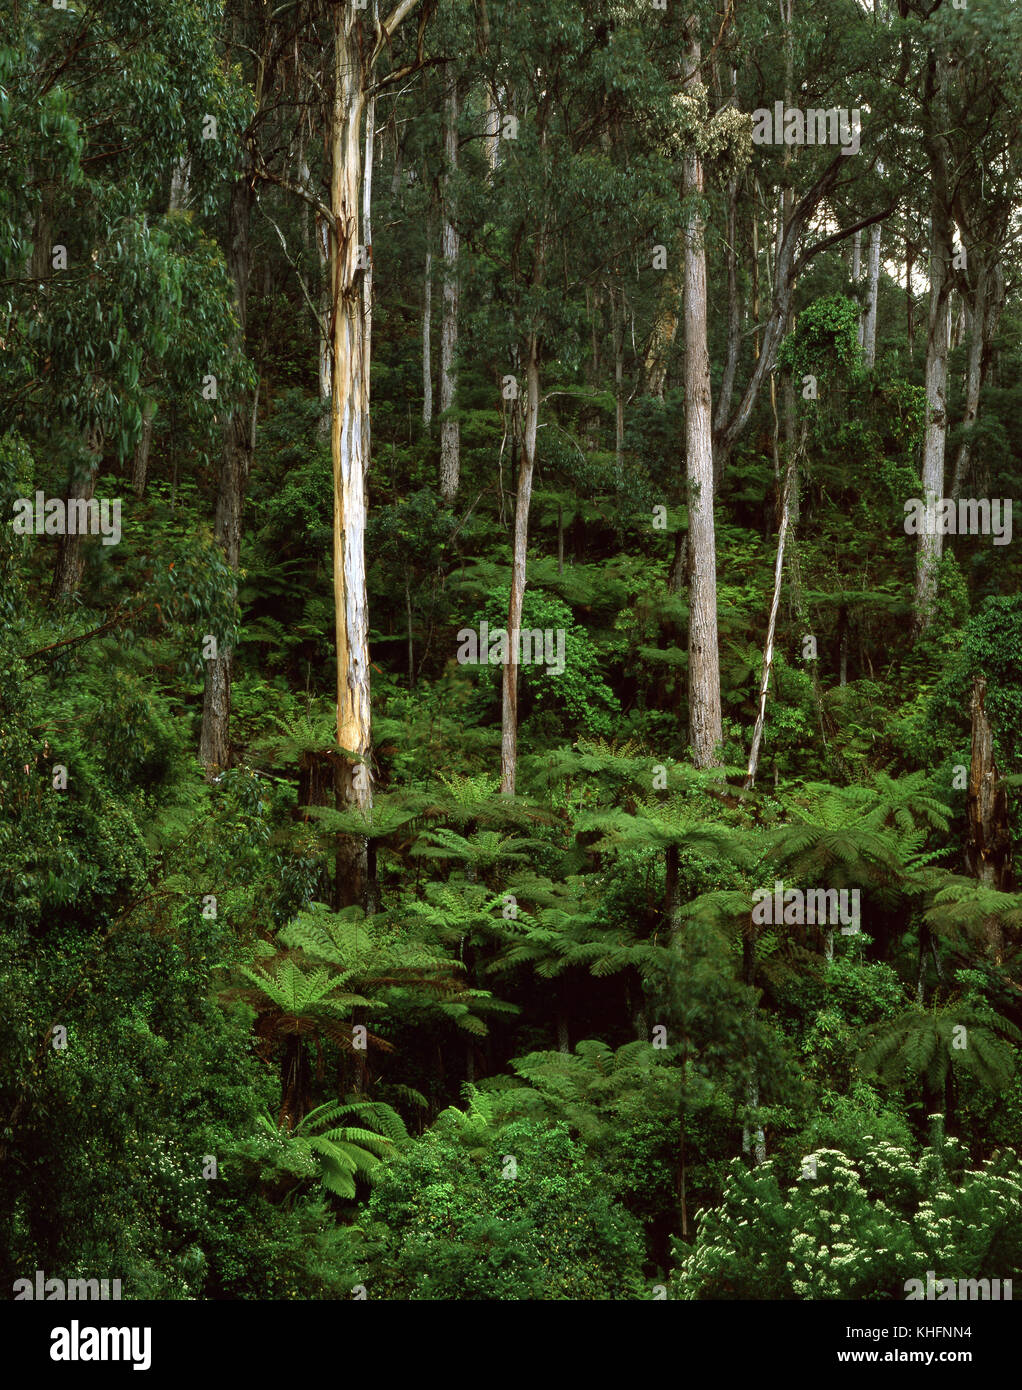 Tall eucalypt forest with tree fern understorey (Dicksonia antarctica). South East Forests National Park, New South Wales, Australia Stock Photo